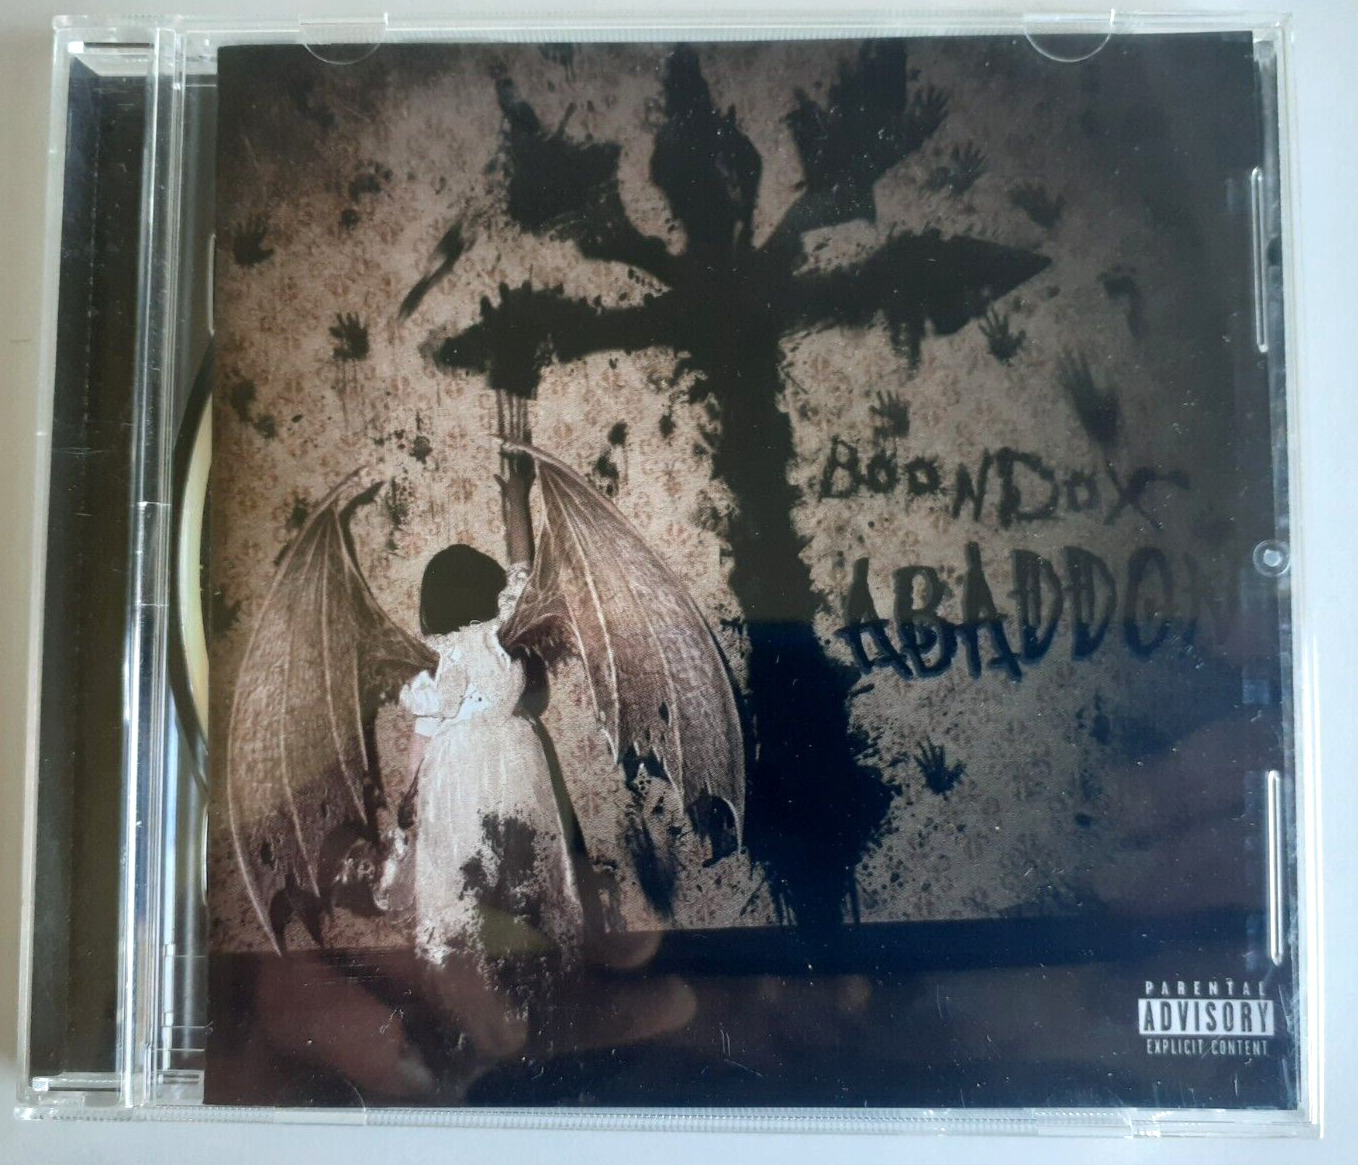 CD BOONDOX Abaddon  PSY5001 Very Rare Rap Horrorcore Music, Excellent Condition!